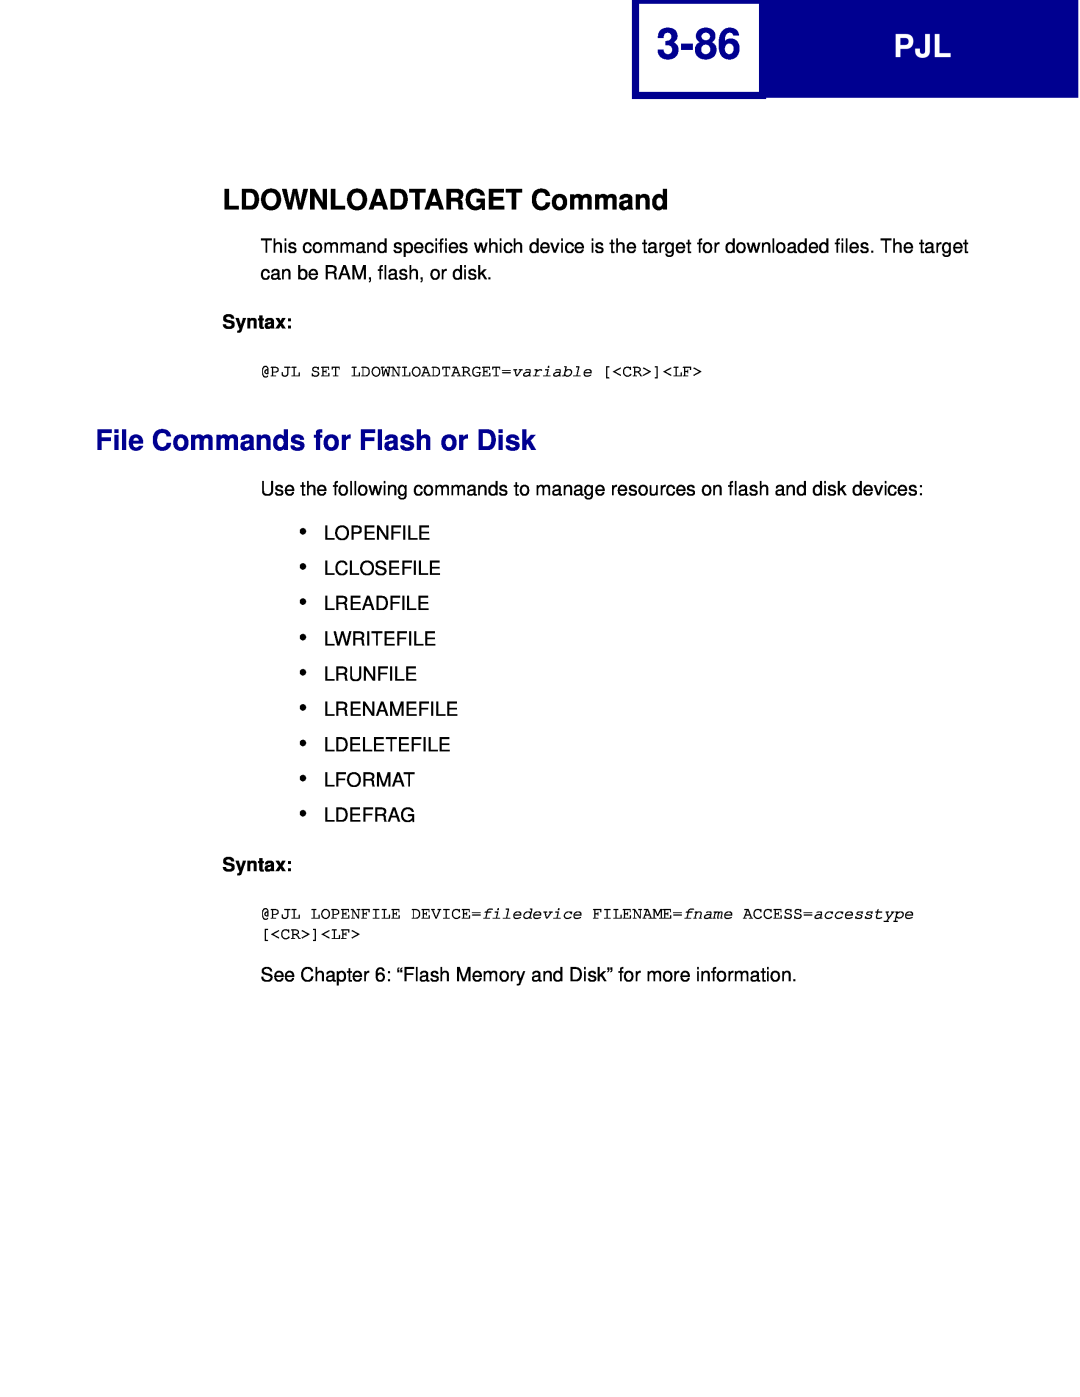 Lexmark C762, C760 manual 3-86, LDOWNLOADTARGET Command, File Commands for Flash or Disk, Syntax 